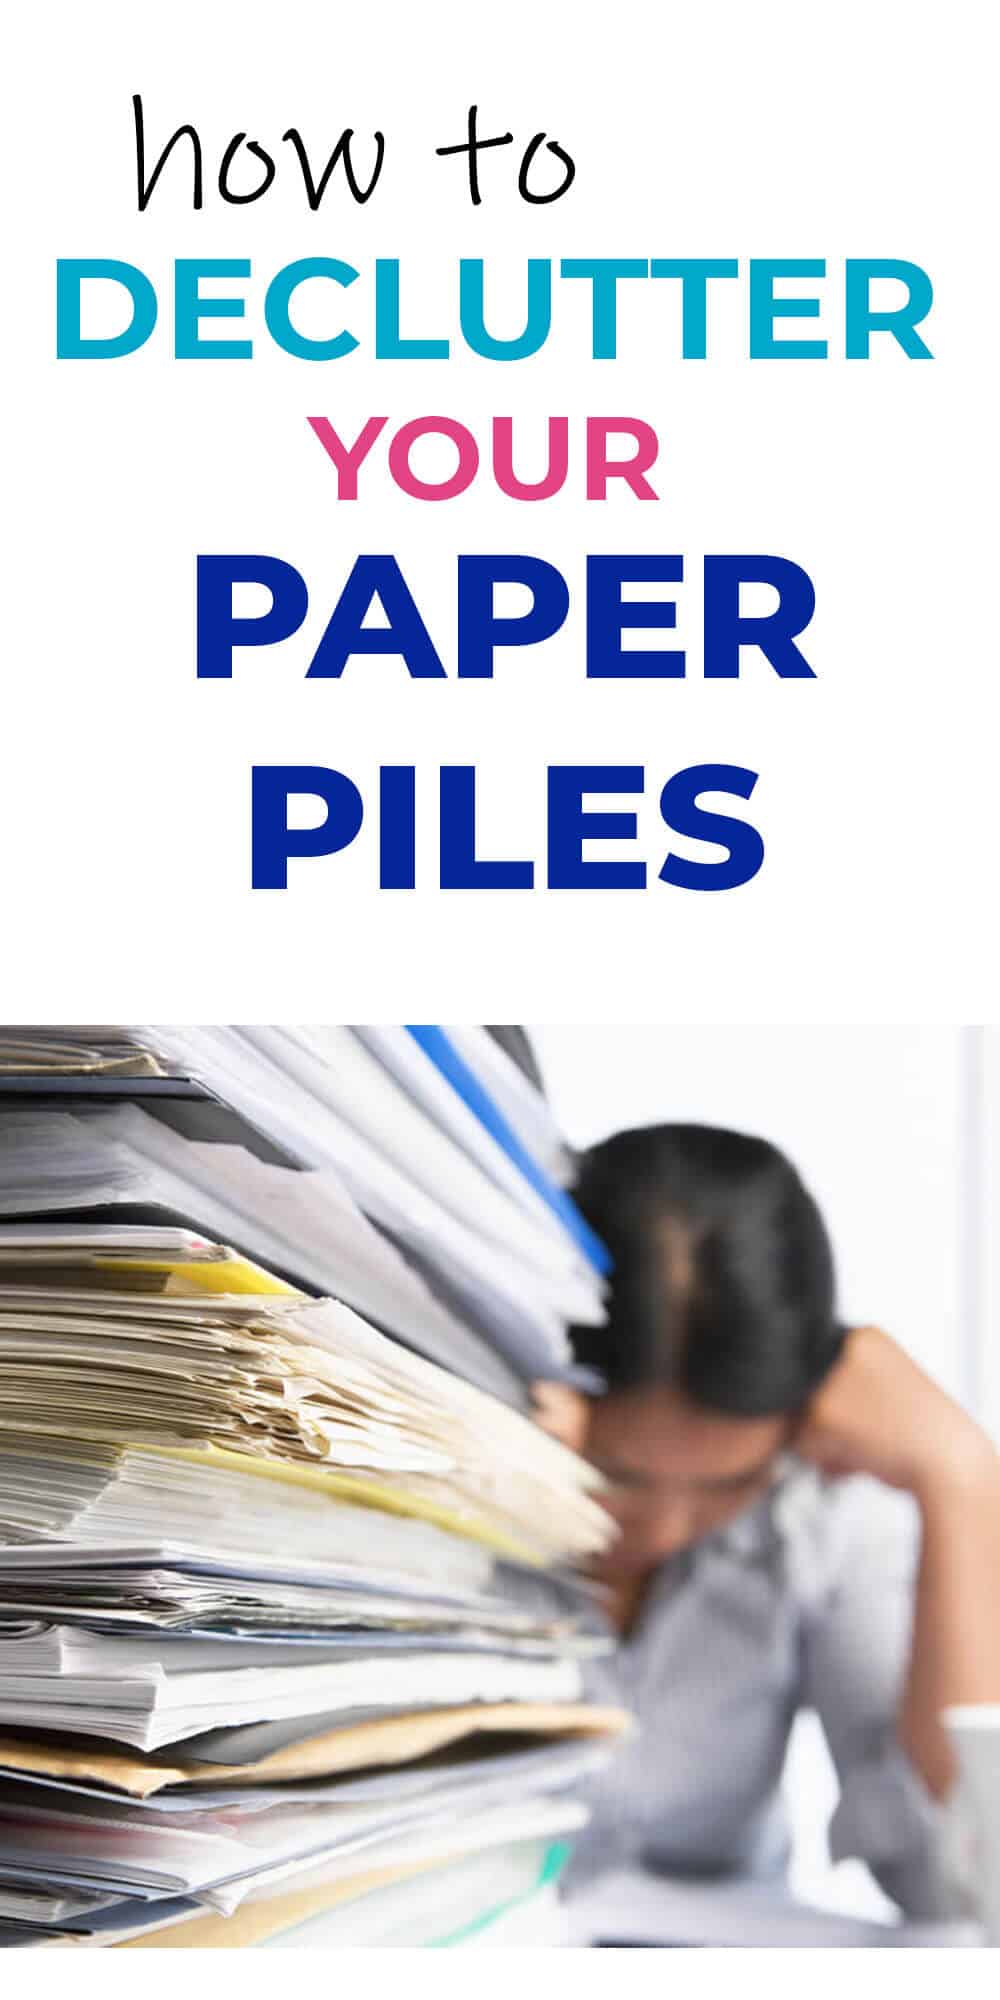 How to Declutter the Paper Piles for Good